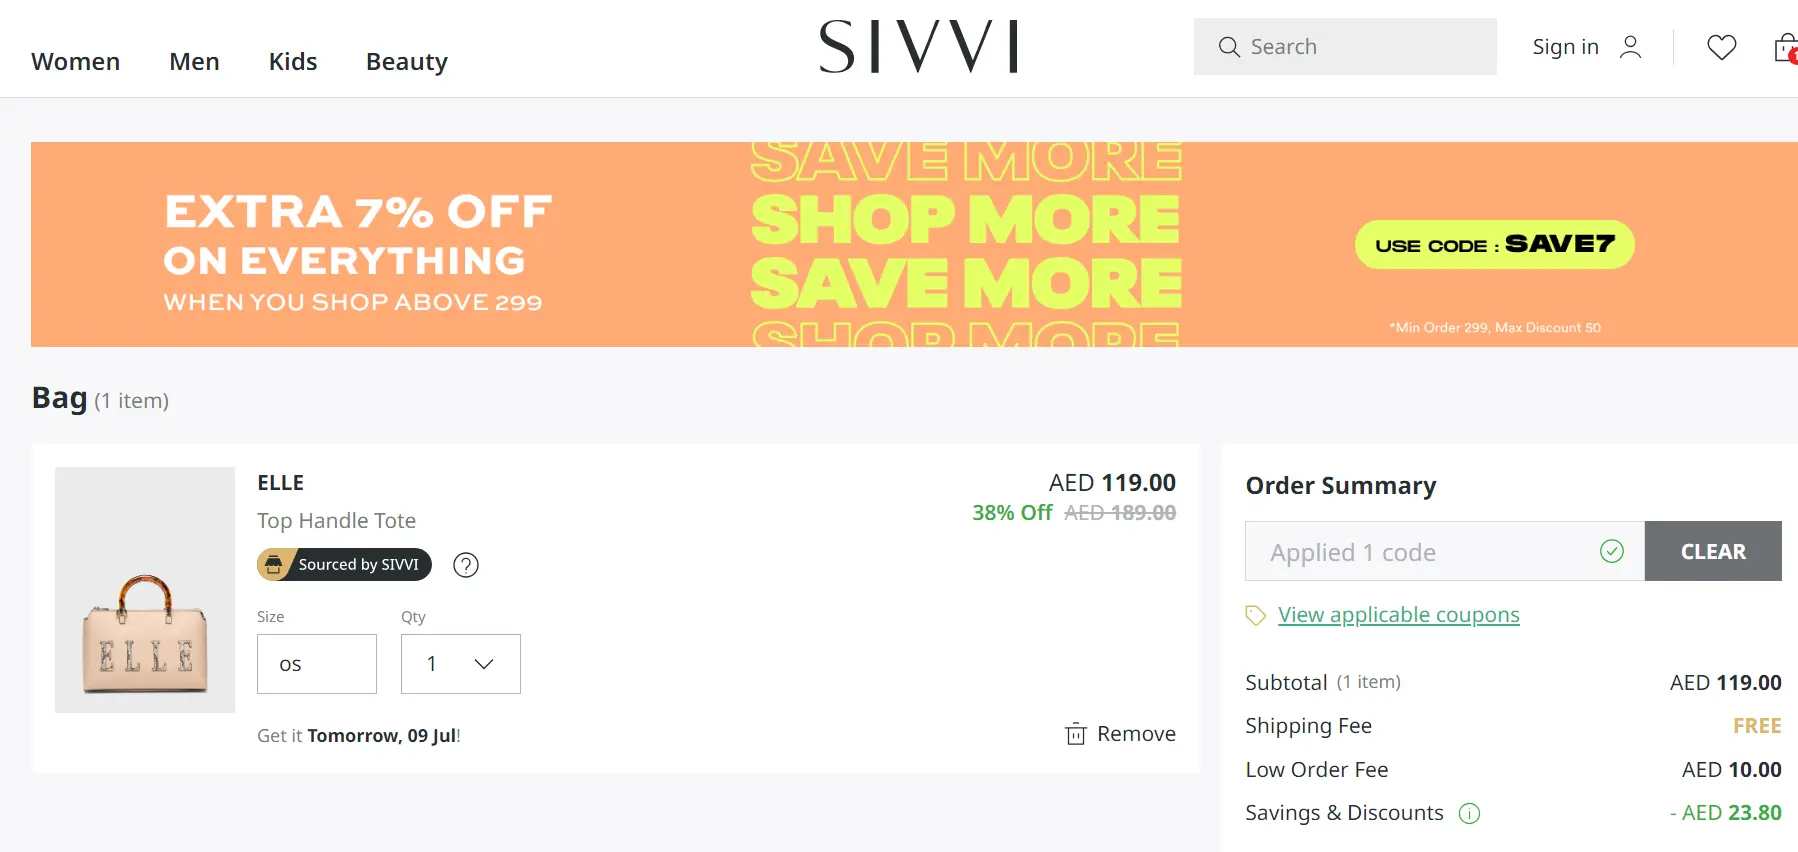 Screenshot of tested coupon for Sivvi